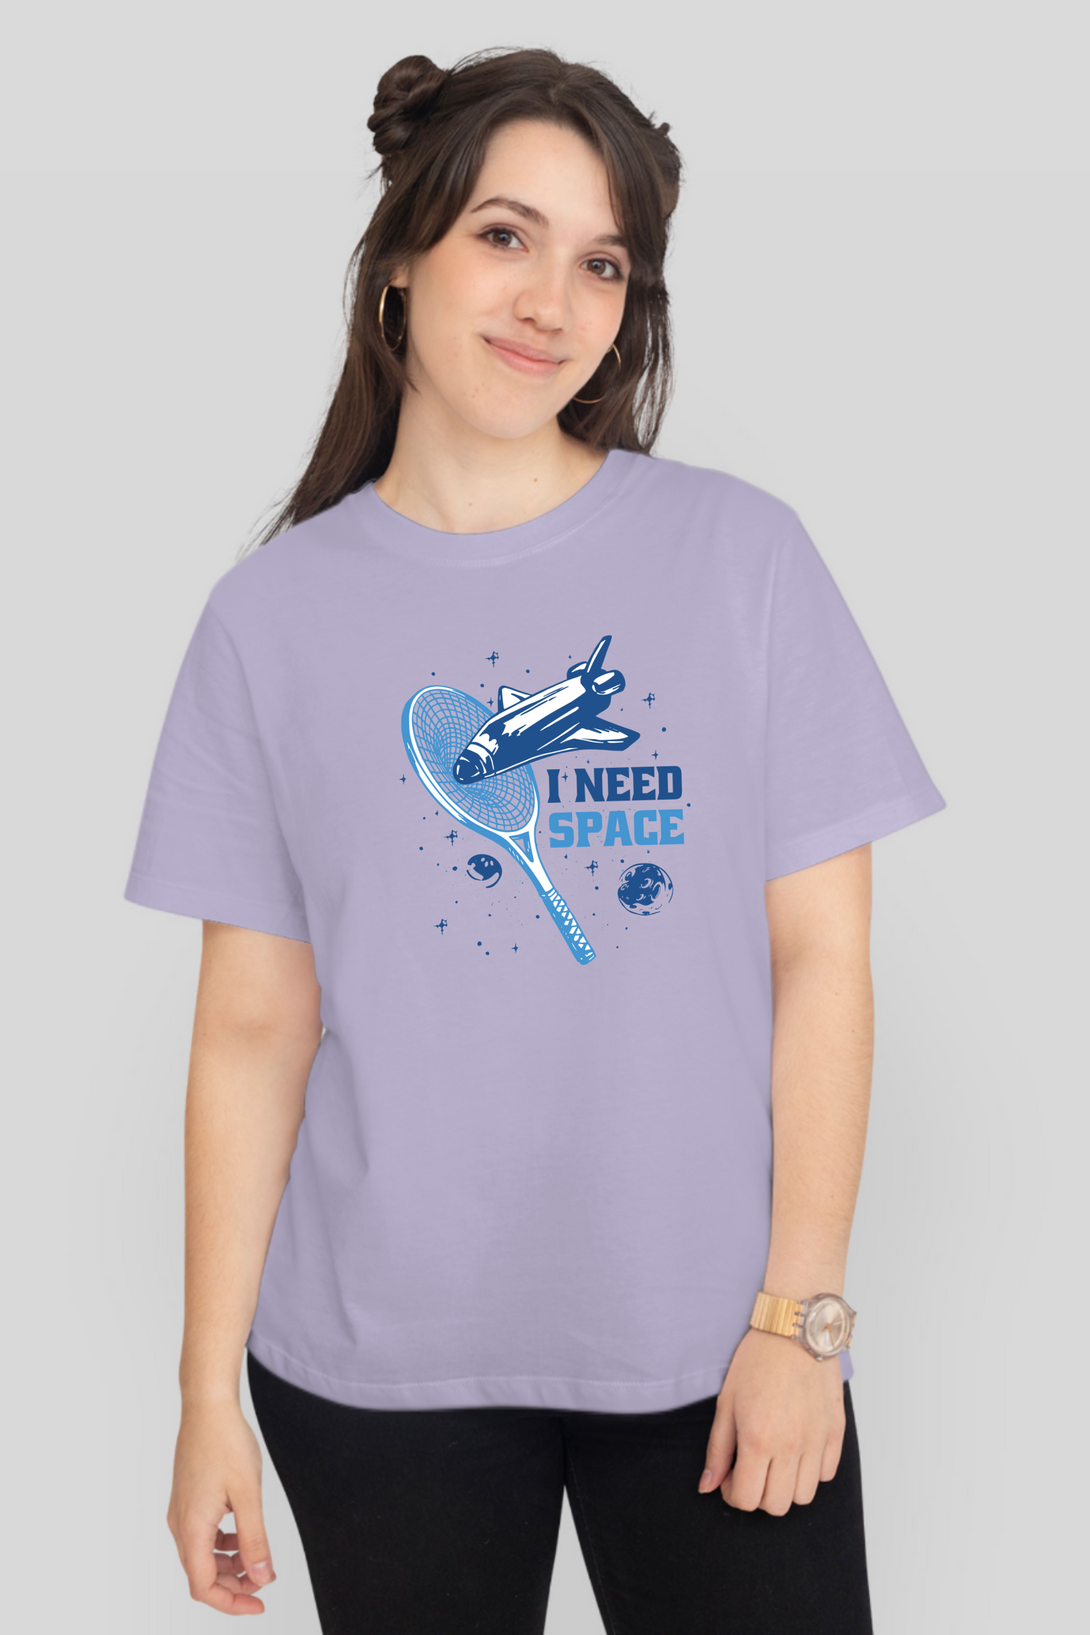 I Need Space Printed T-Shirt For Women - WowWaves - 8